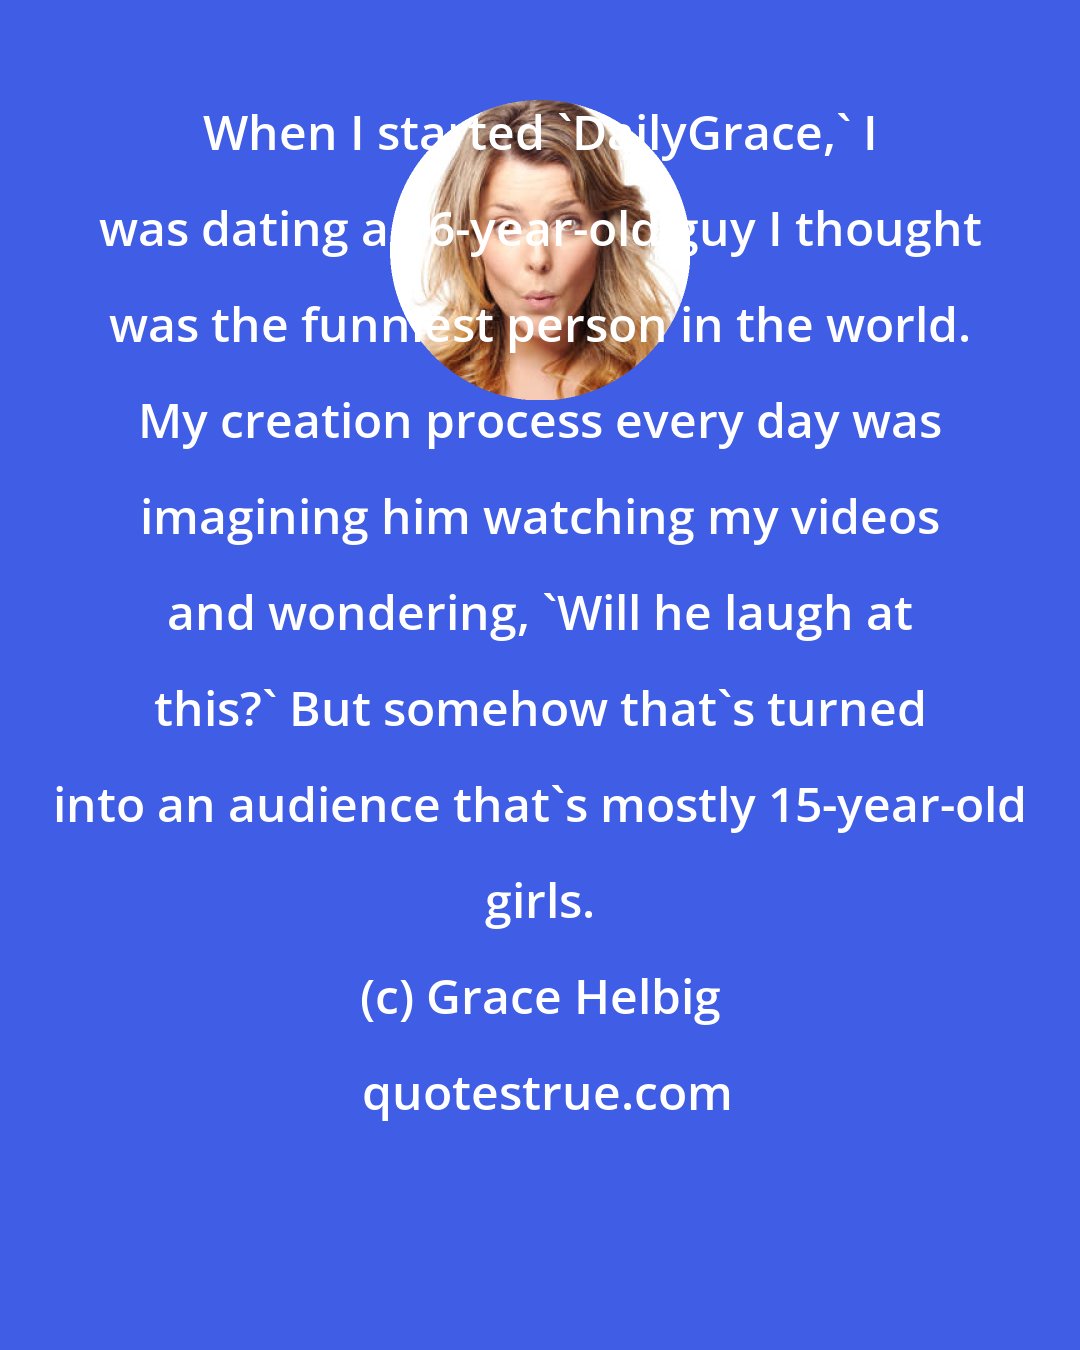 Grace Helbig: When I started 'DailyGrace,' I was dating a 26-year-old guy I thought was the funniest person in the world. My creation process every day was imagining him watching my videos and wondering, 'Will he laugh at this?' But somehow that's turned into an audience that's mostly 15-year-old girls.